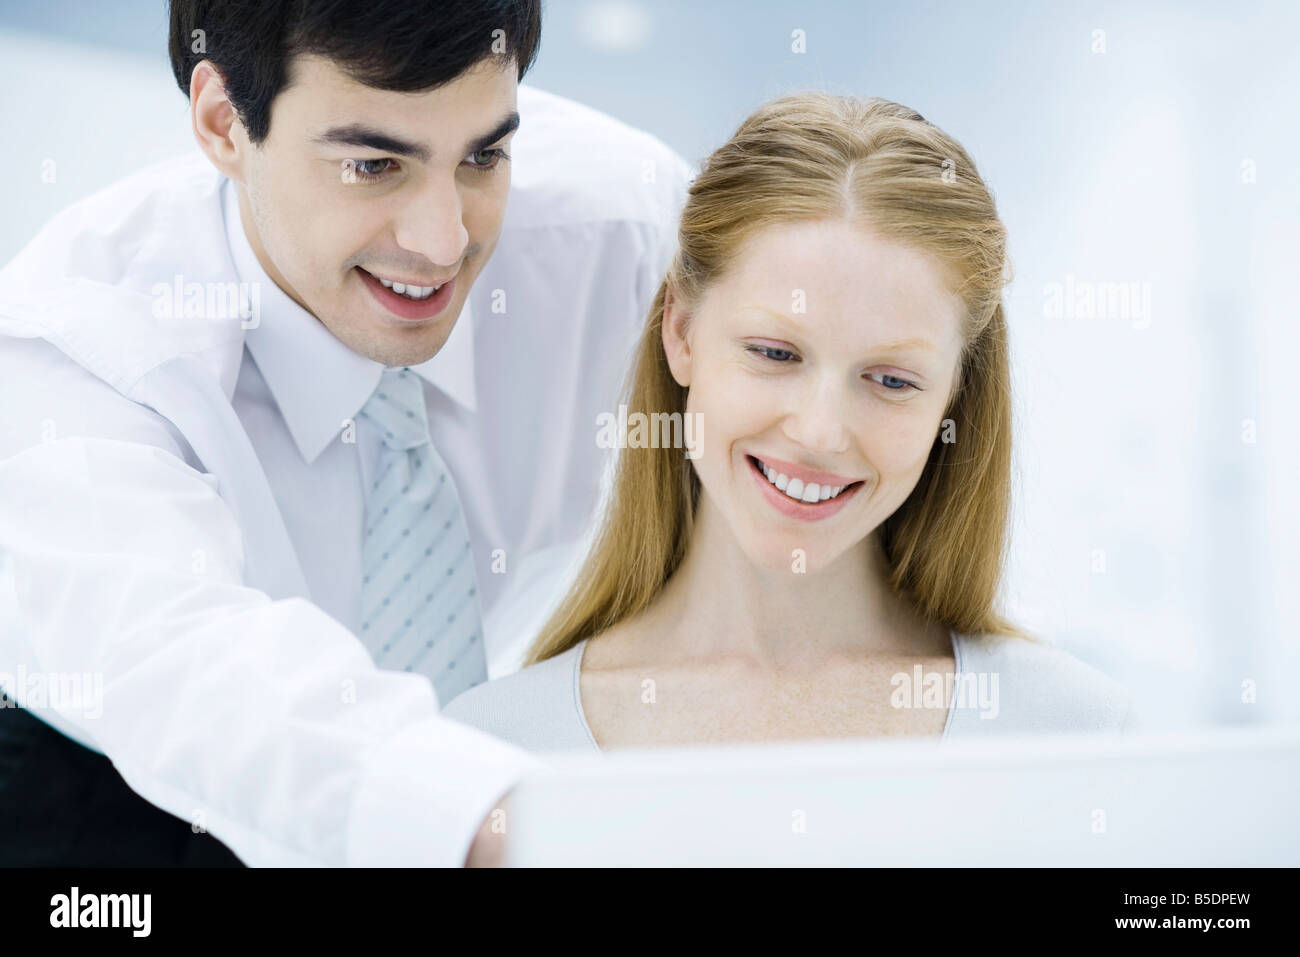 Professional man looking over female colleague's shoulder, pointing at laptop computer Stock Photo